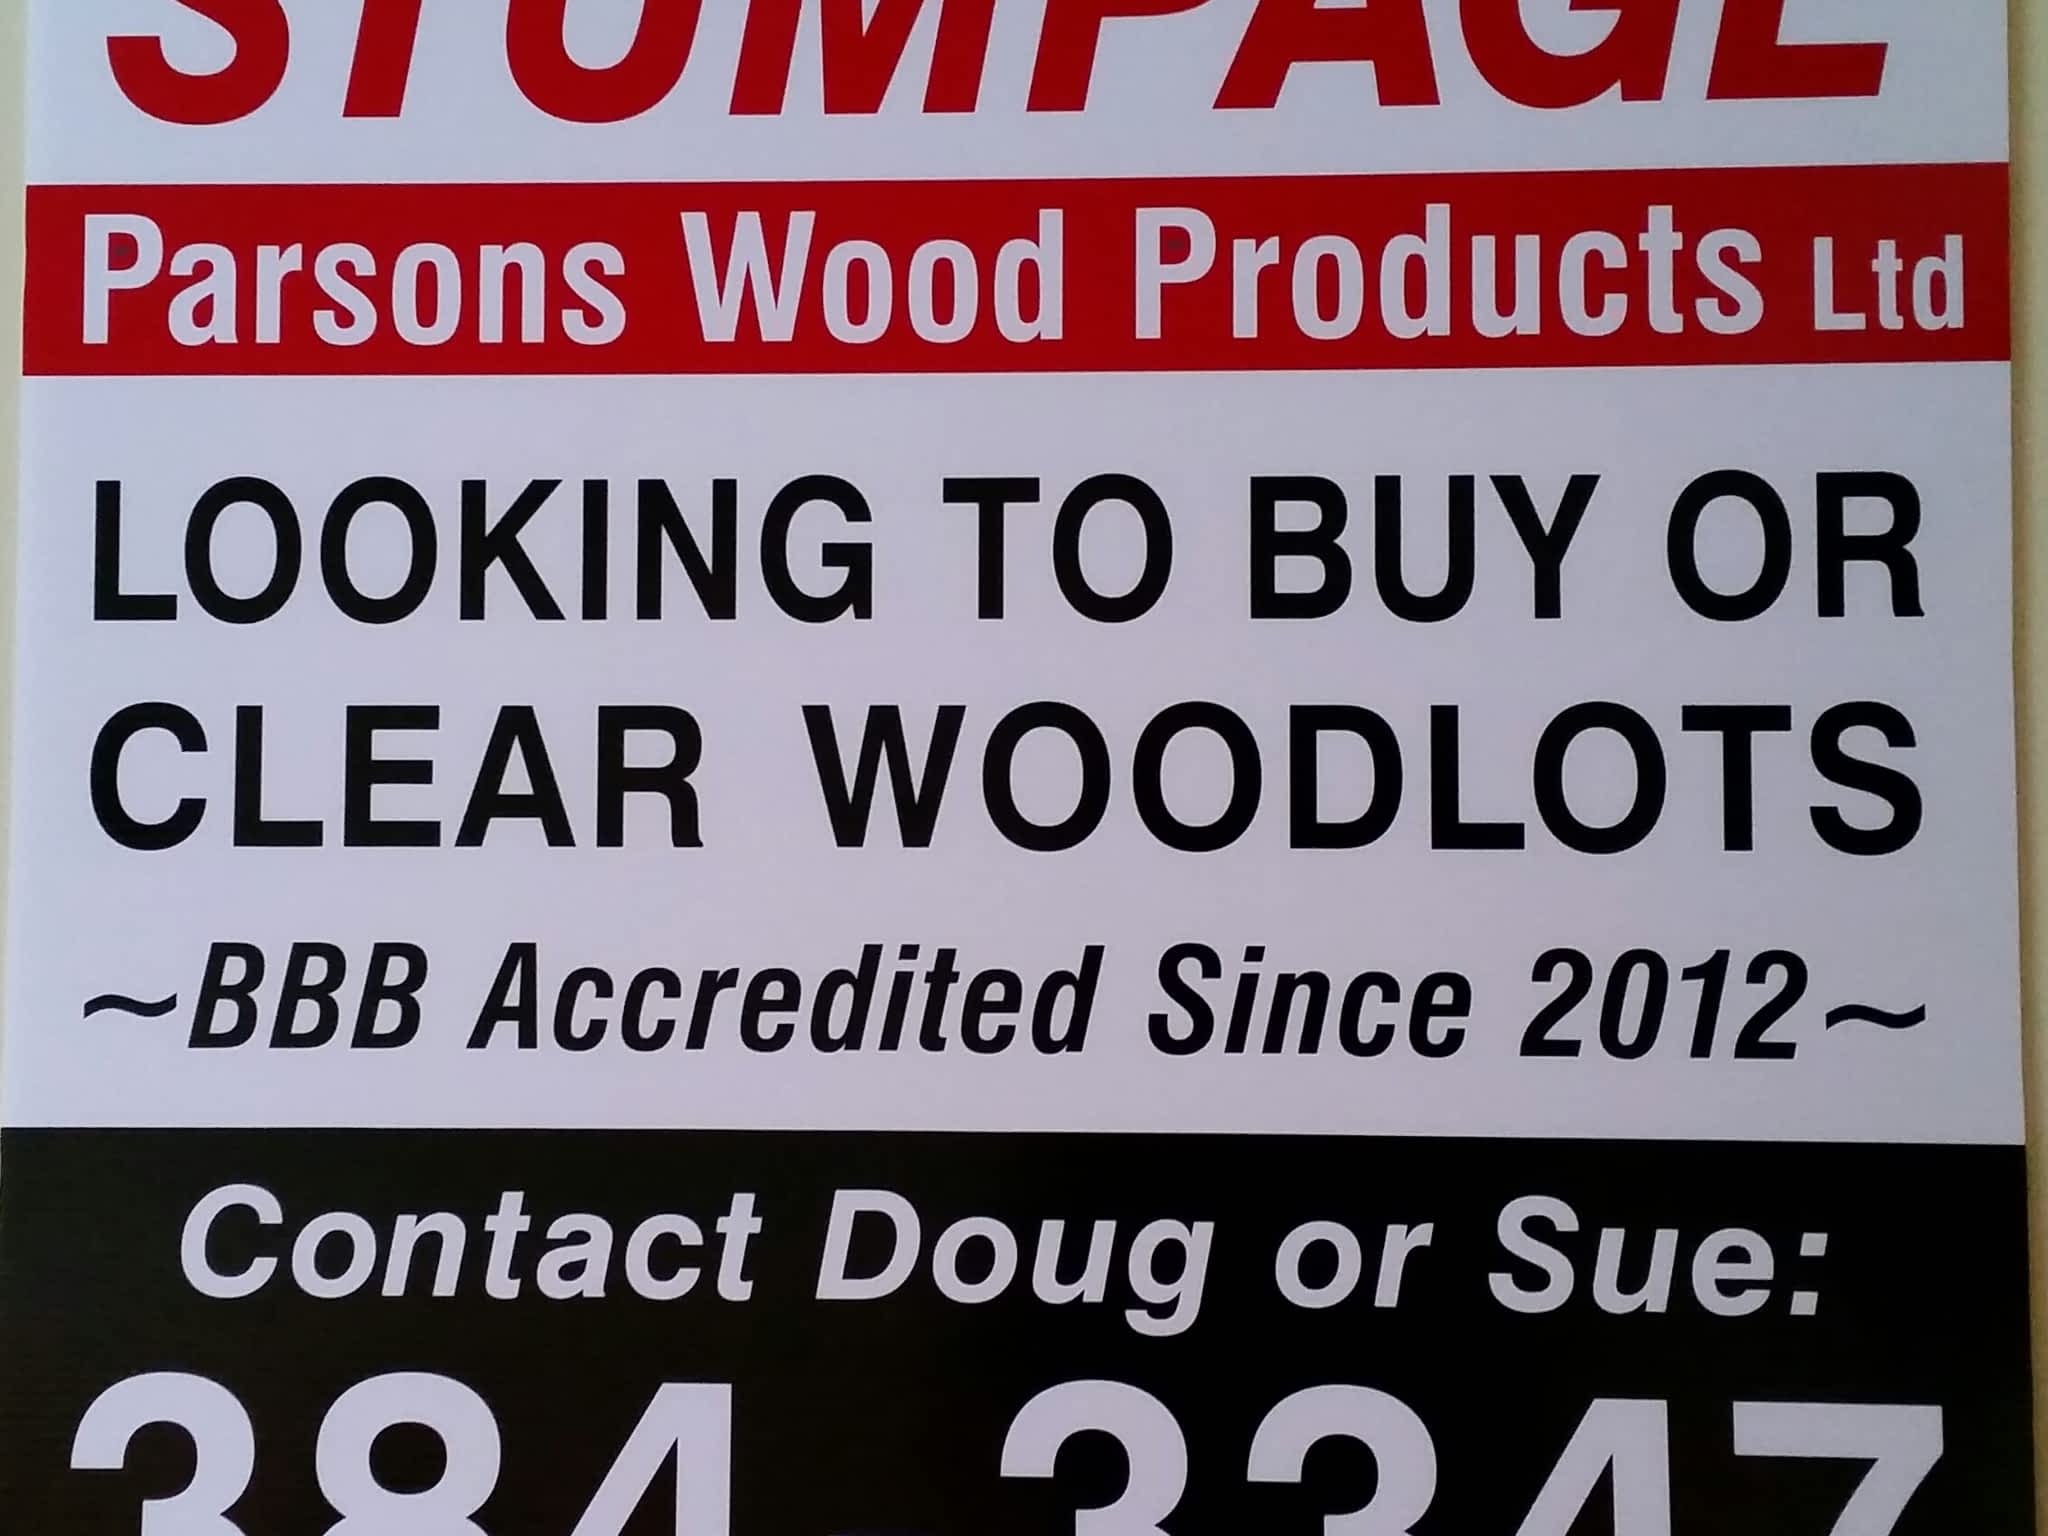 photo Parsons Wood Products